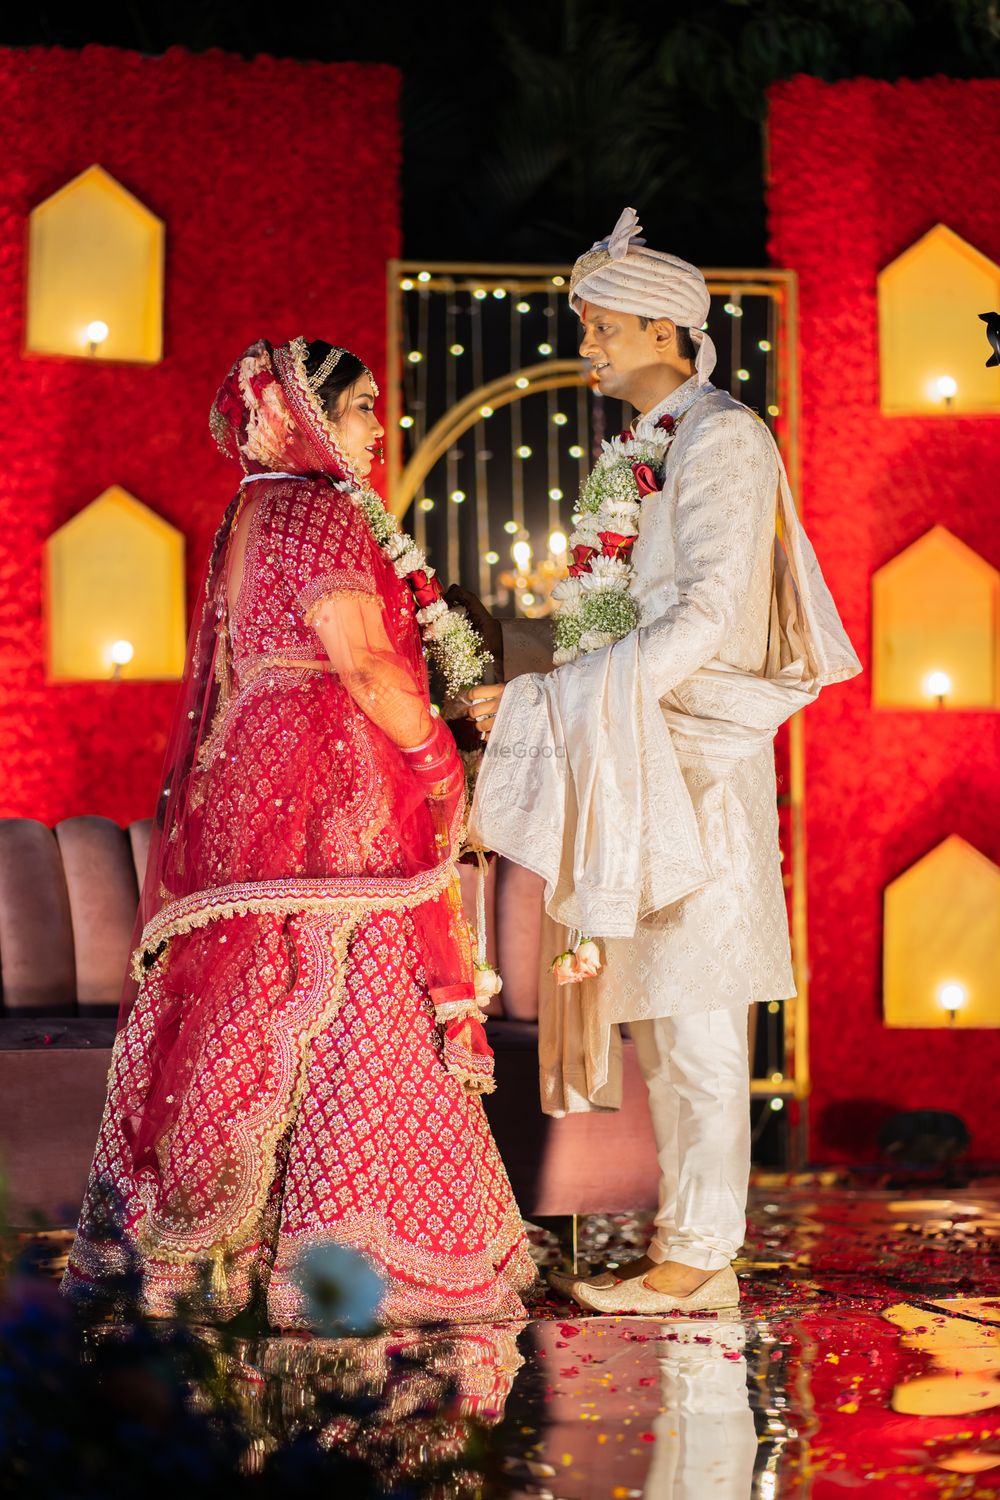 Photo From Palak weds Sarvesh - By The Decor Inc.